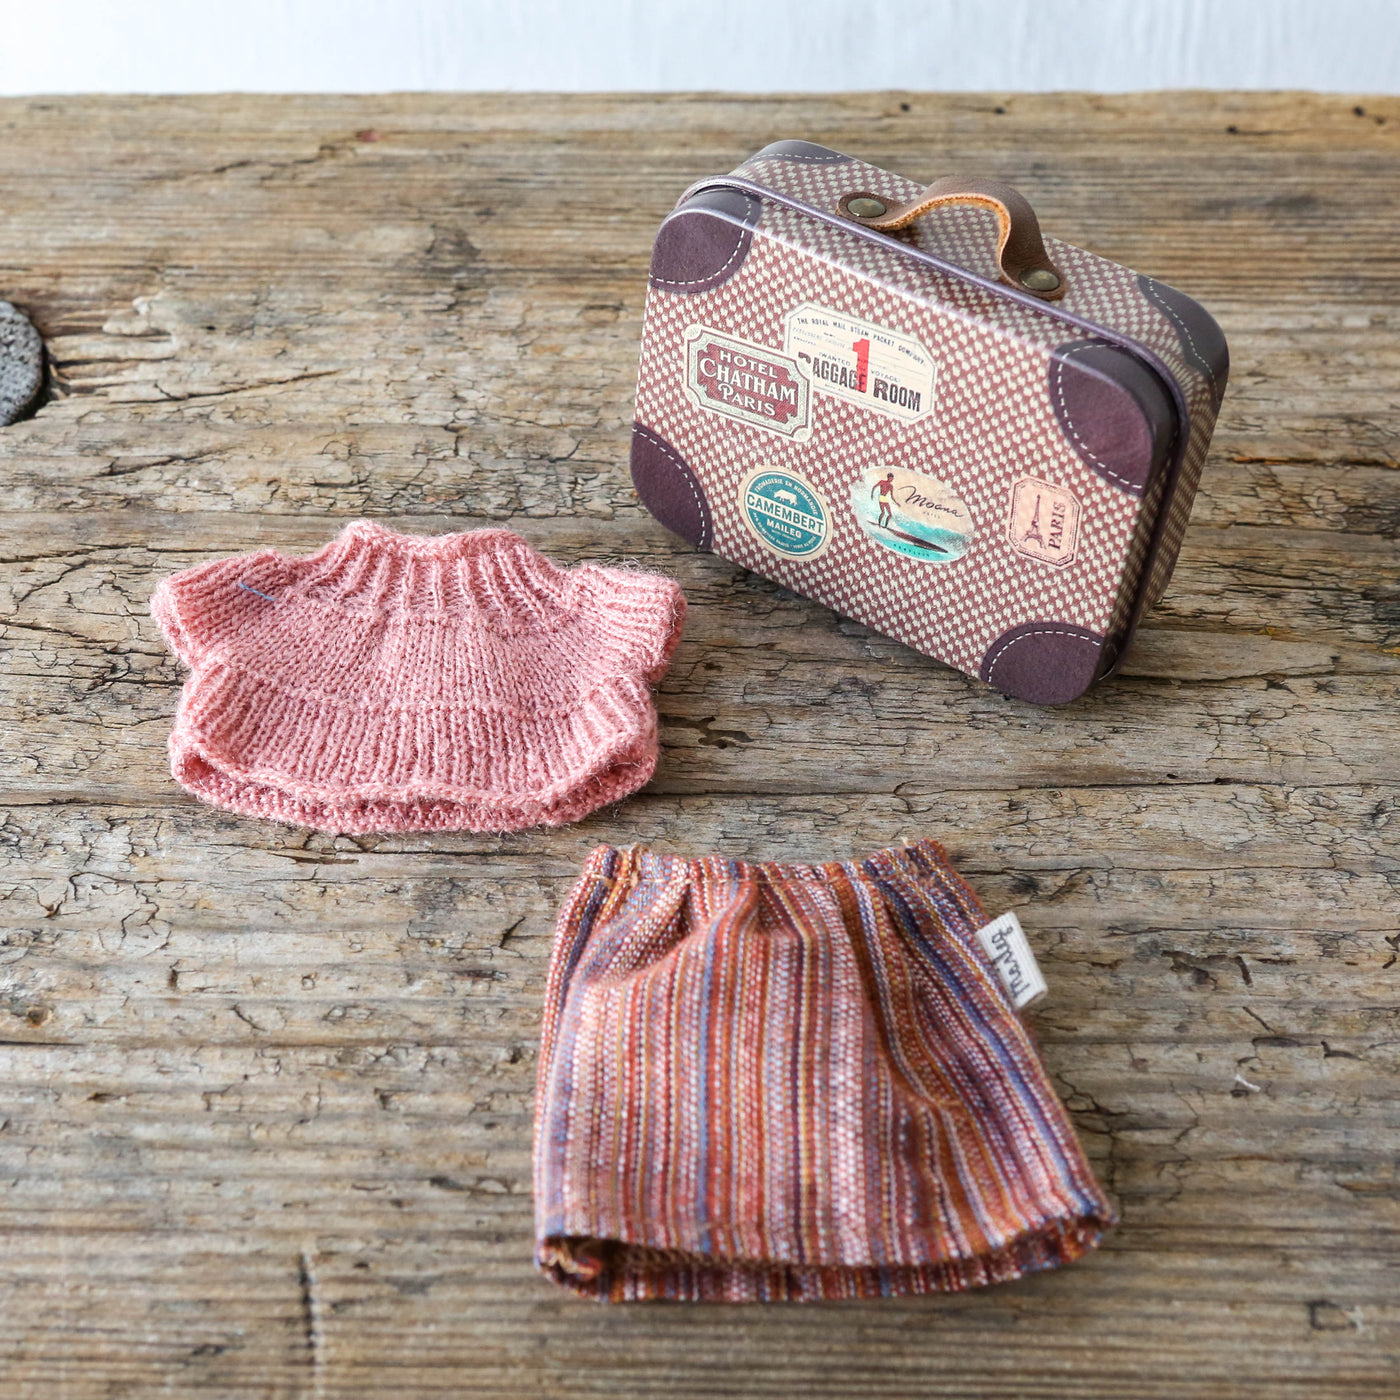 Knitted Blouse & Skirt in Suitcase - Grandma Mouse